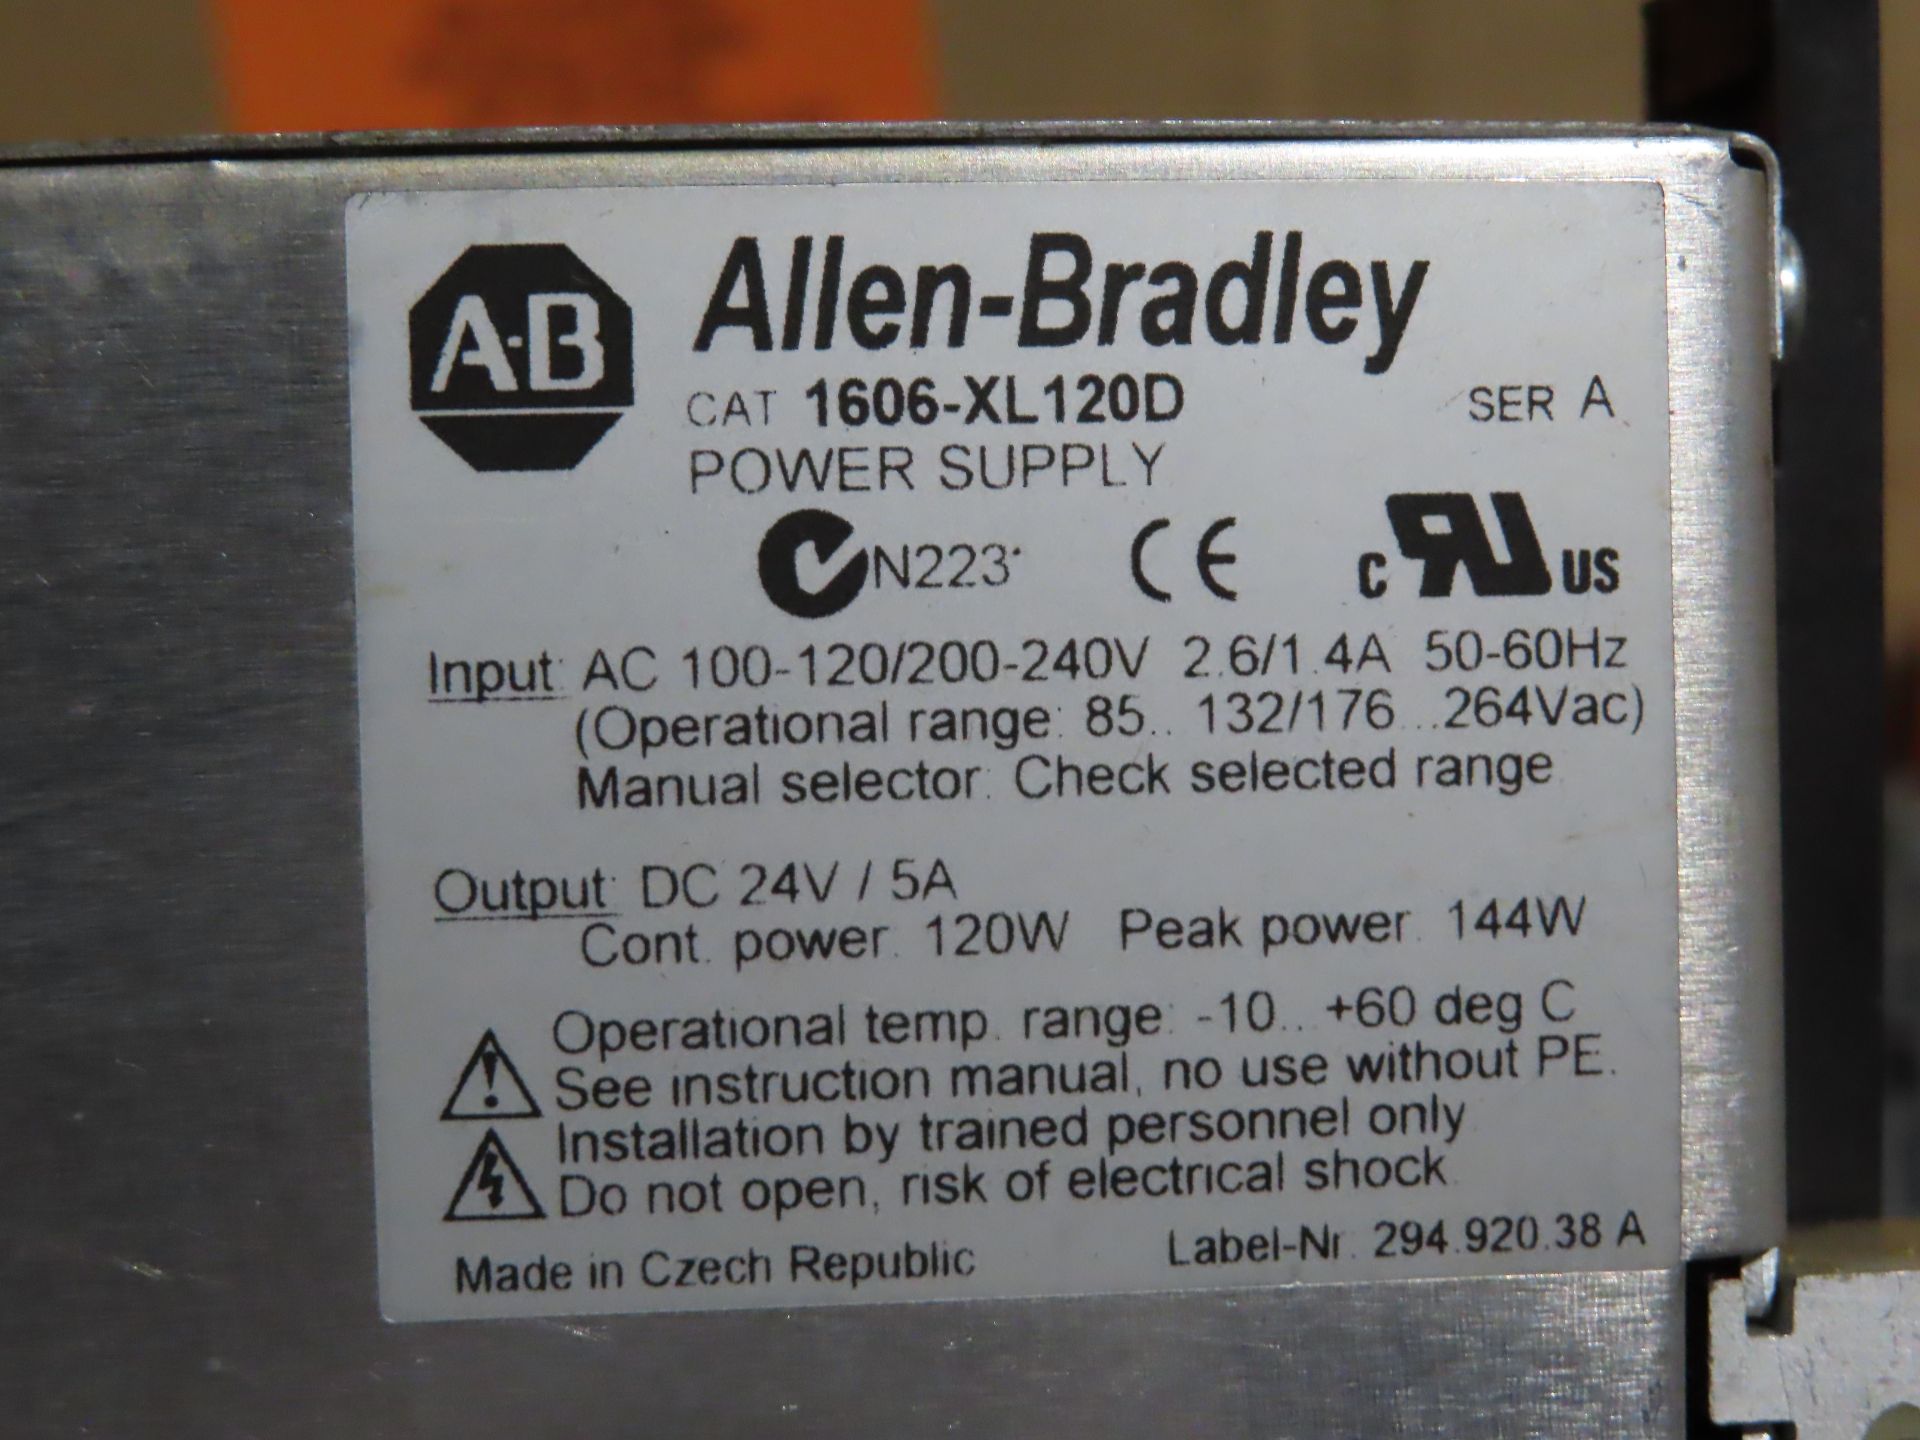 Qty 5 Allen Bradley power supplies as pictured, as always with Brolyn LLC auctions, all lots can - Image 2 of 3